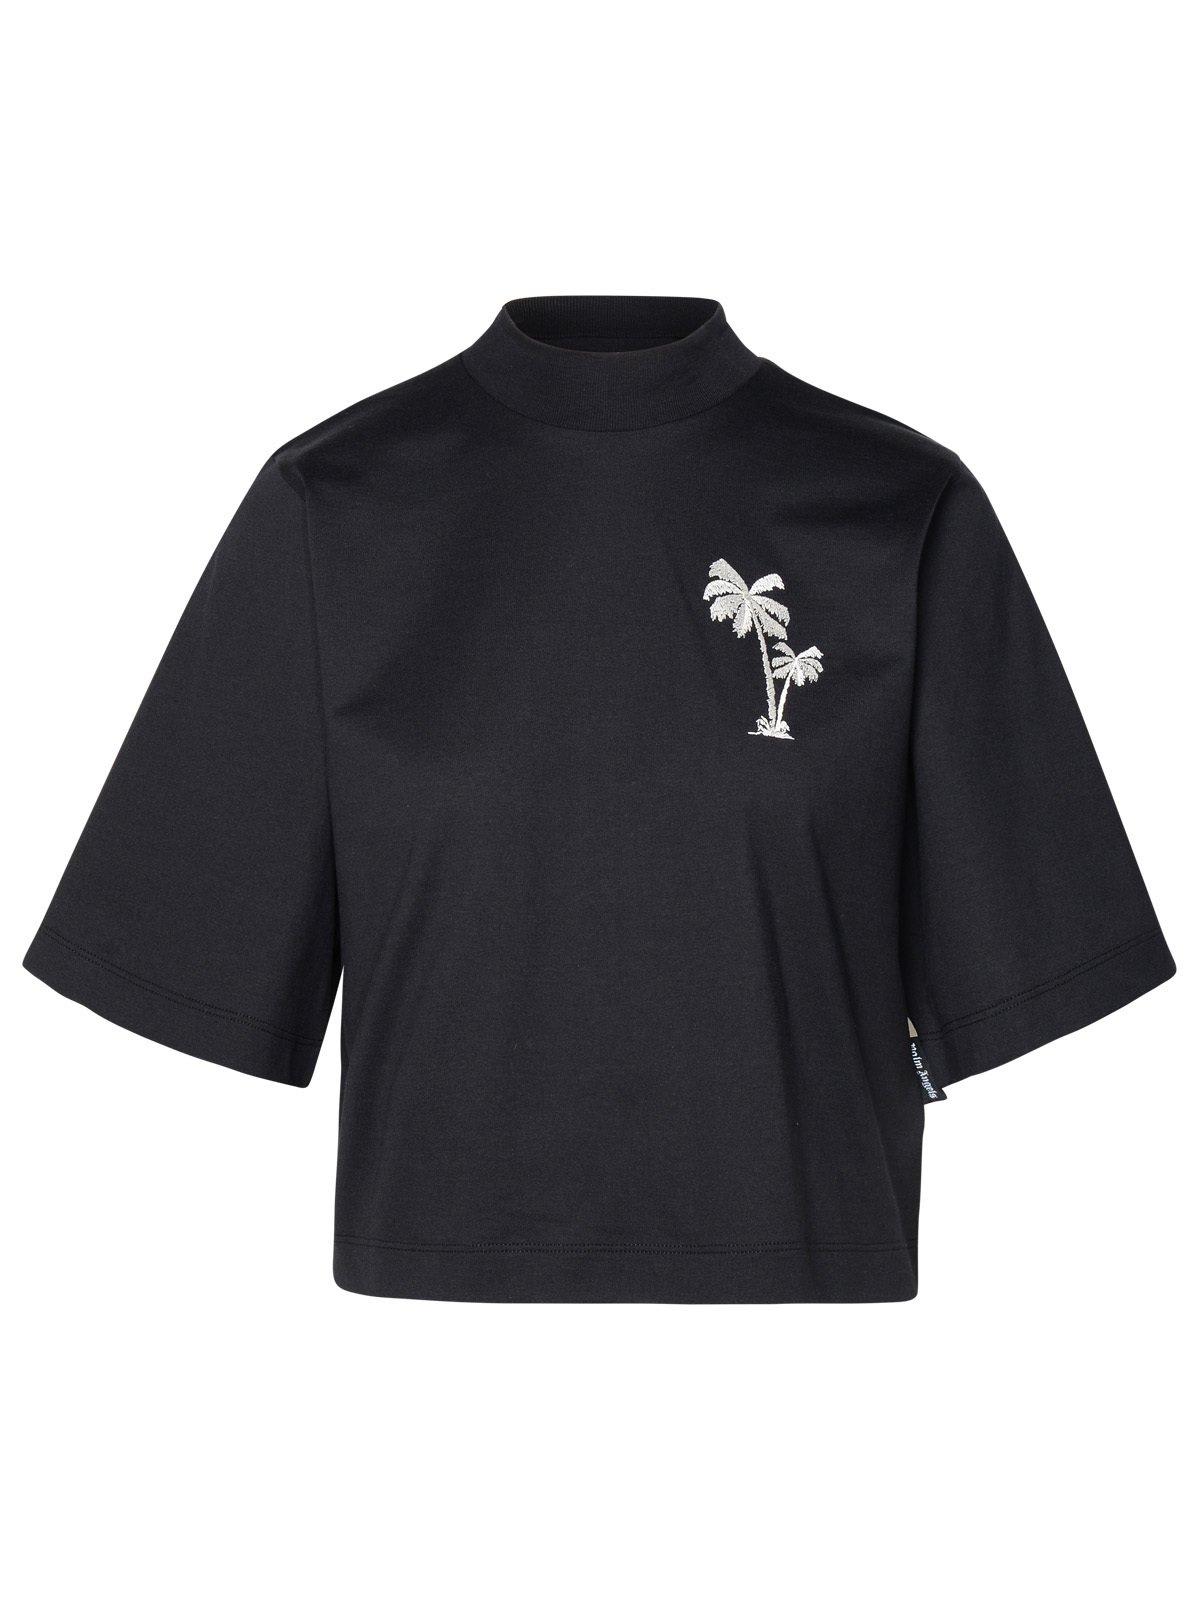 PALM ANGELS PALM EMBROIDERED CROPPED T-SHIRT